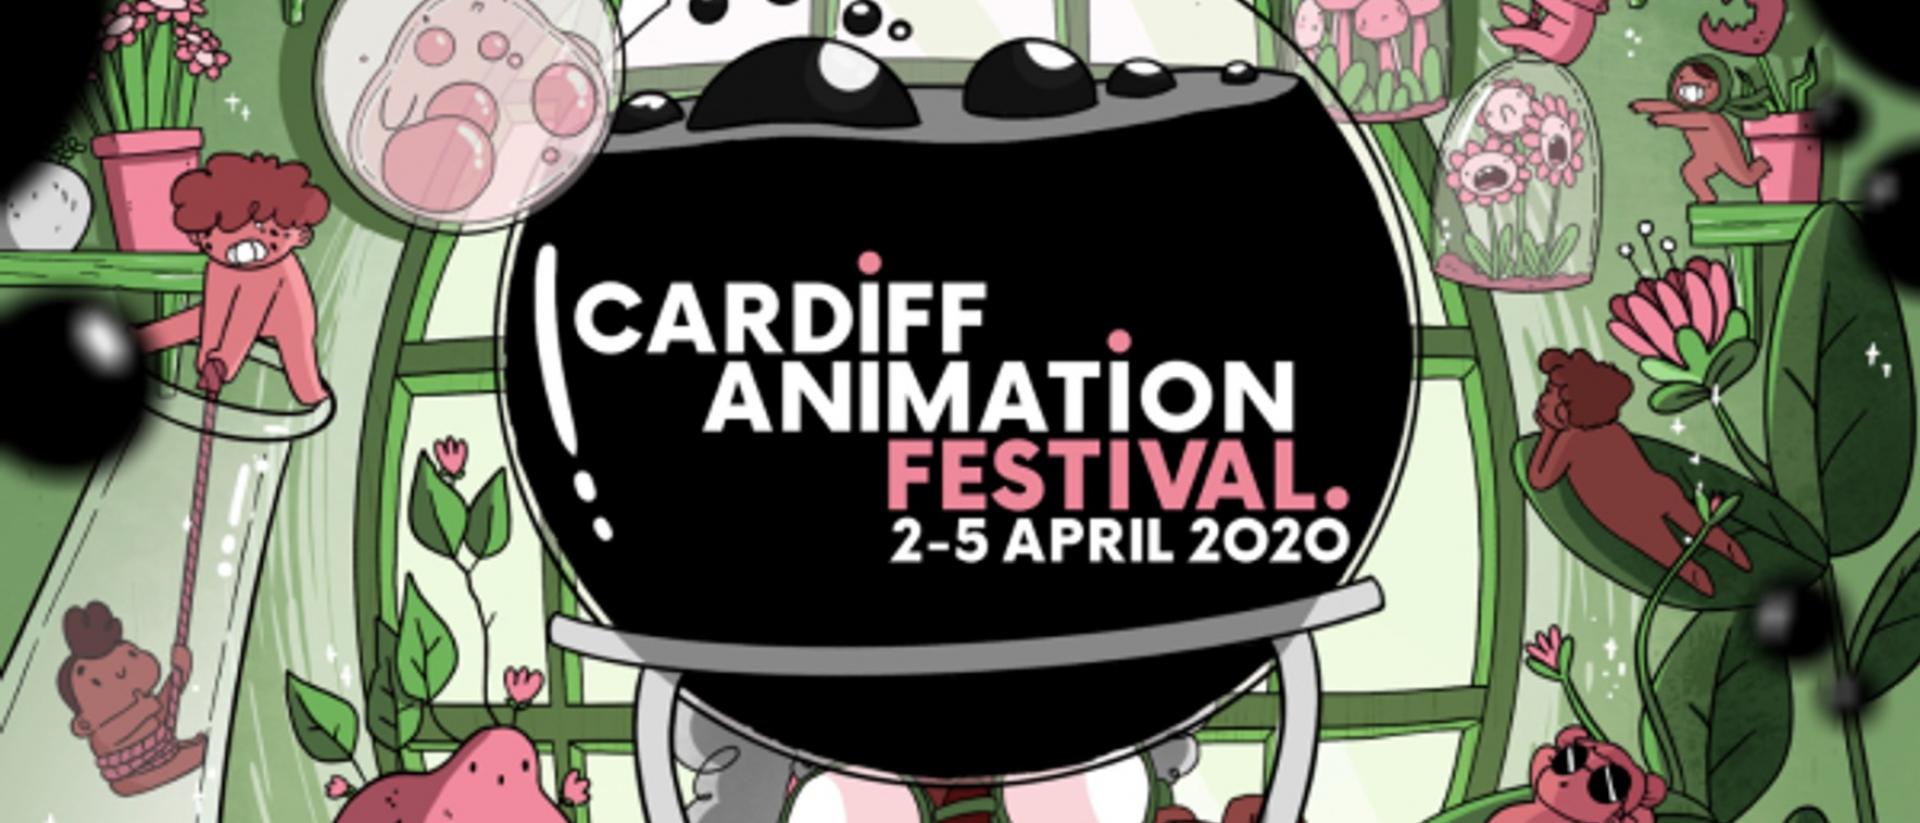 Poster for Cardiff Animation Festival 2020